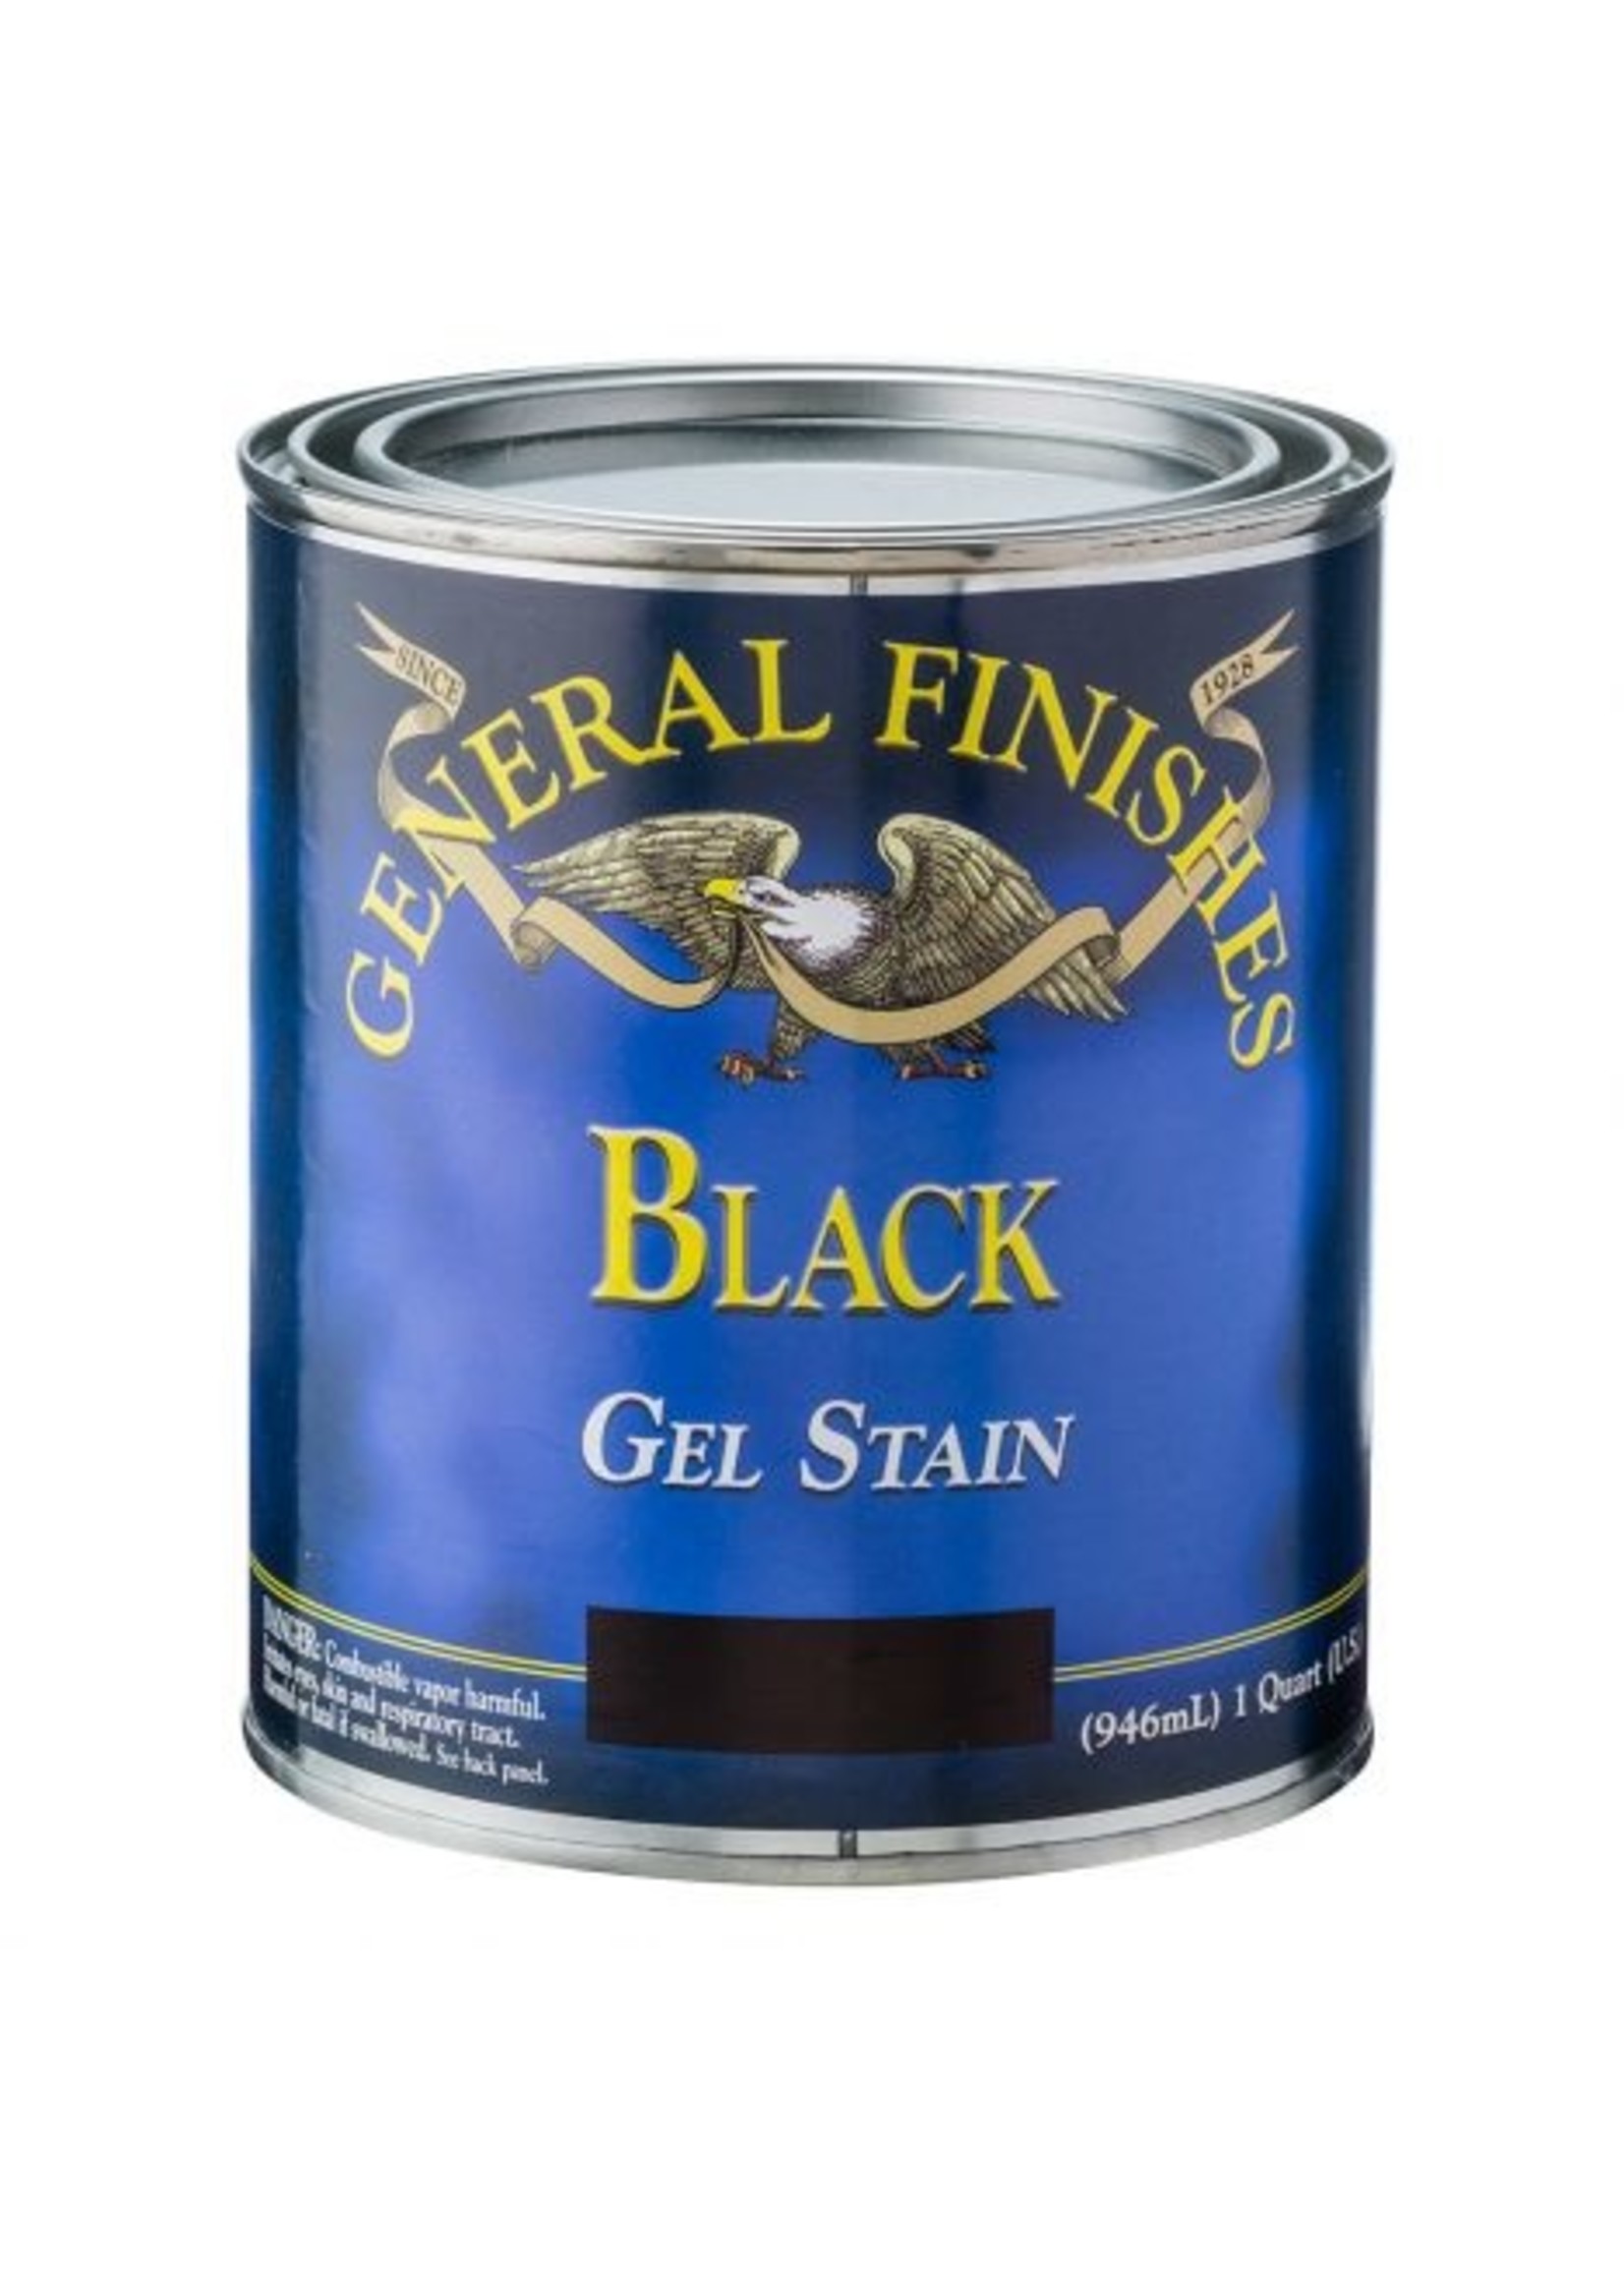 General Finishes Black General Finishes Gel Stain